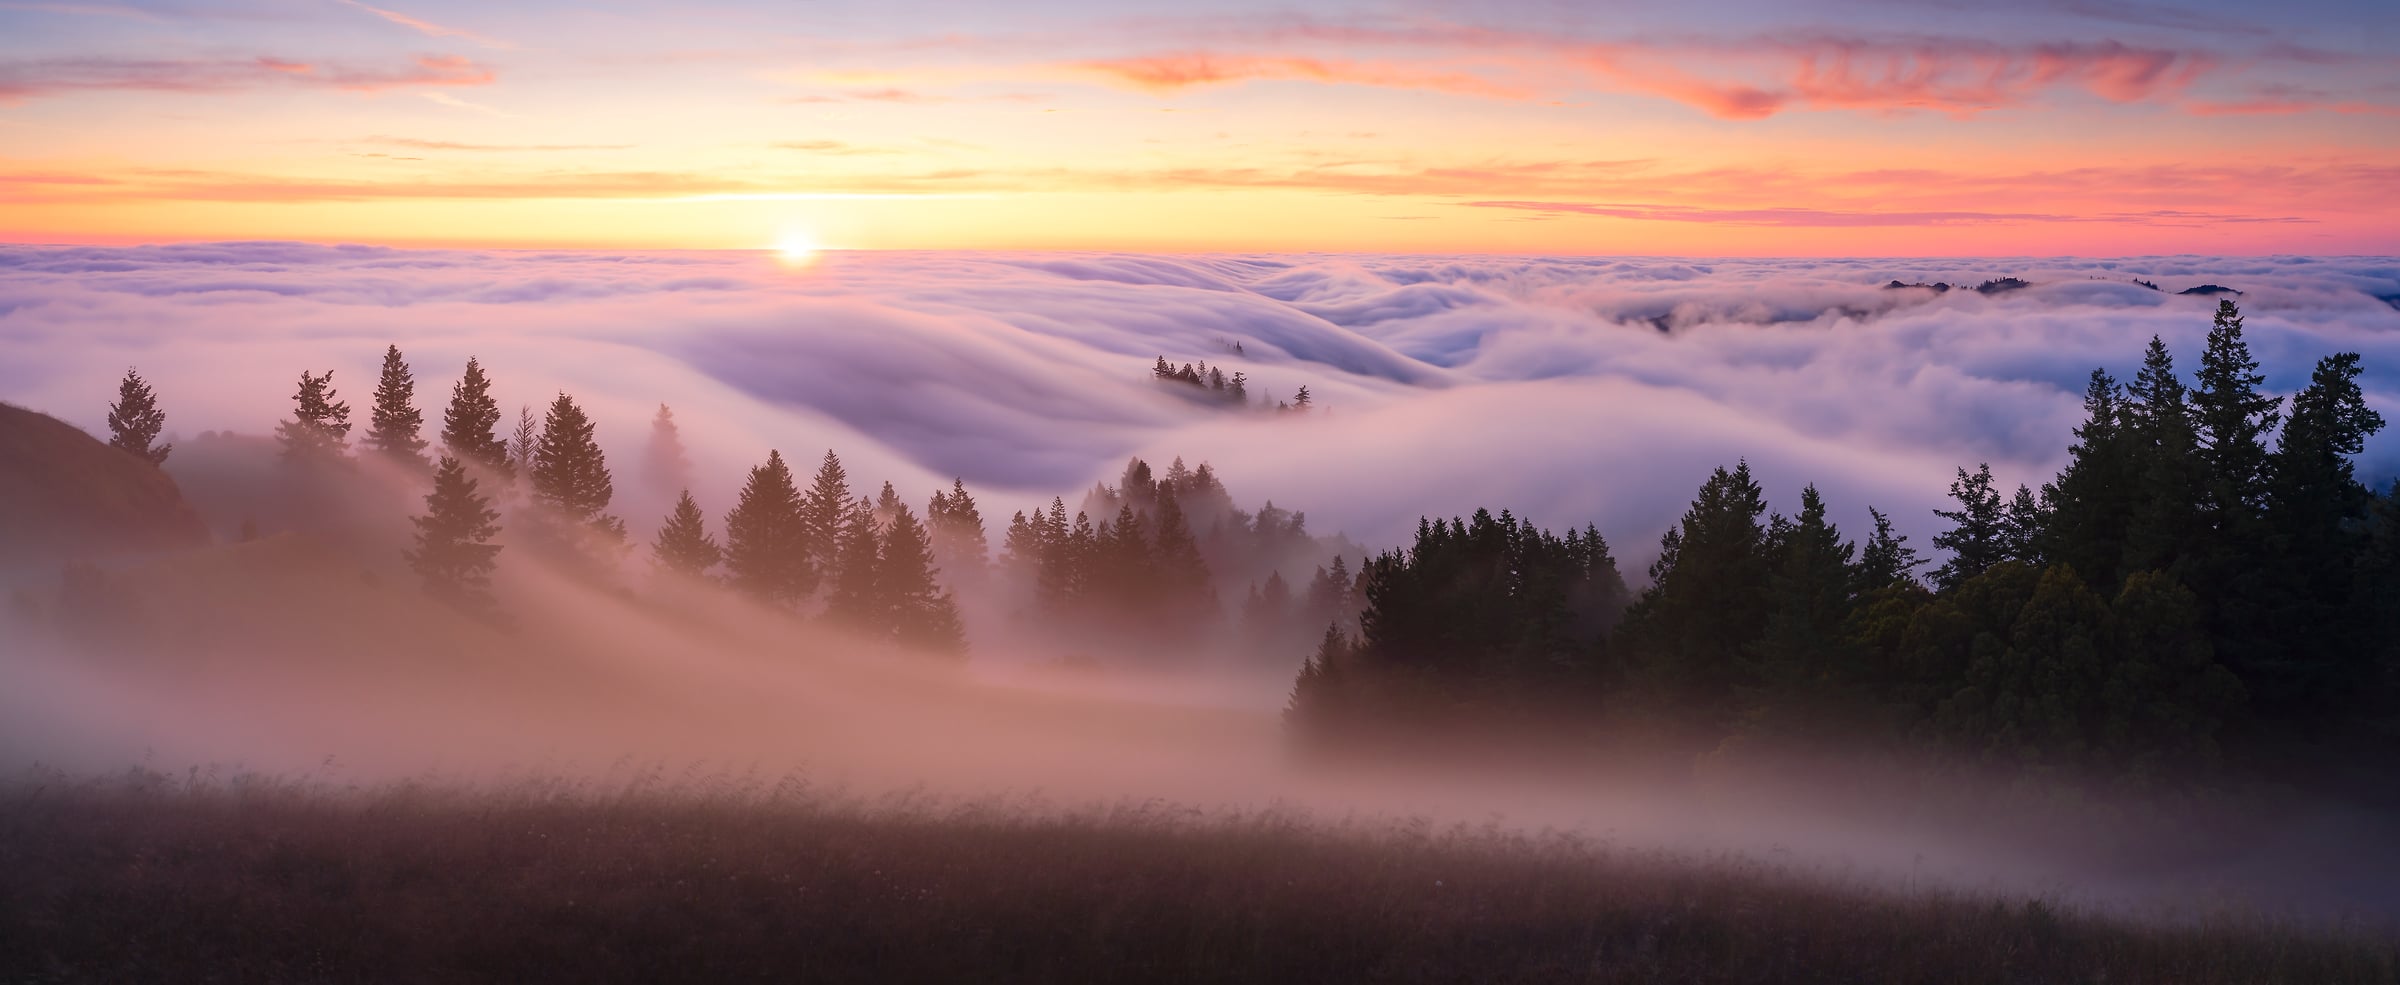 96 megapixels! A very high resolution, large-format VAST photo print of a beautiful sunset over fog with evergreen trees in a field; landscape photograph created by Jeff Lewis in Marin County, California.